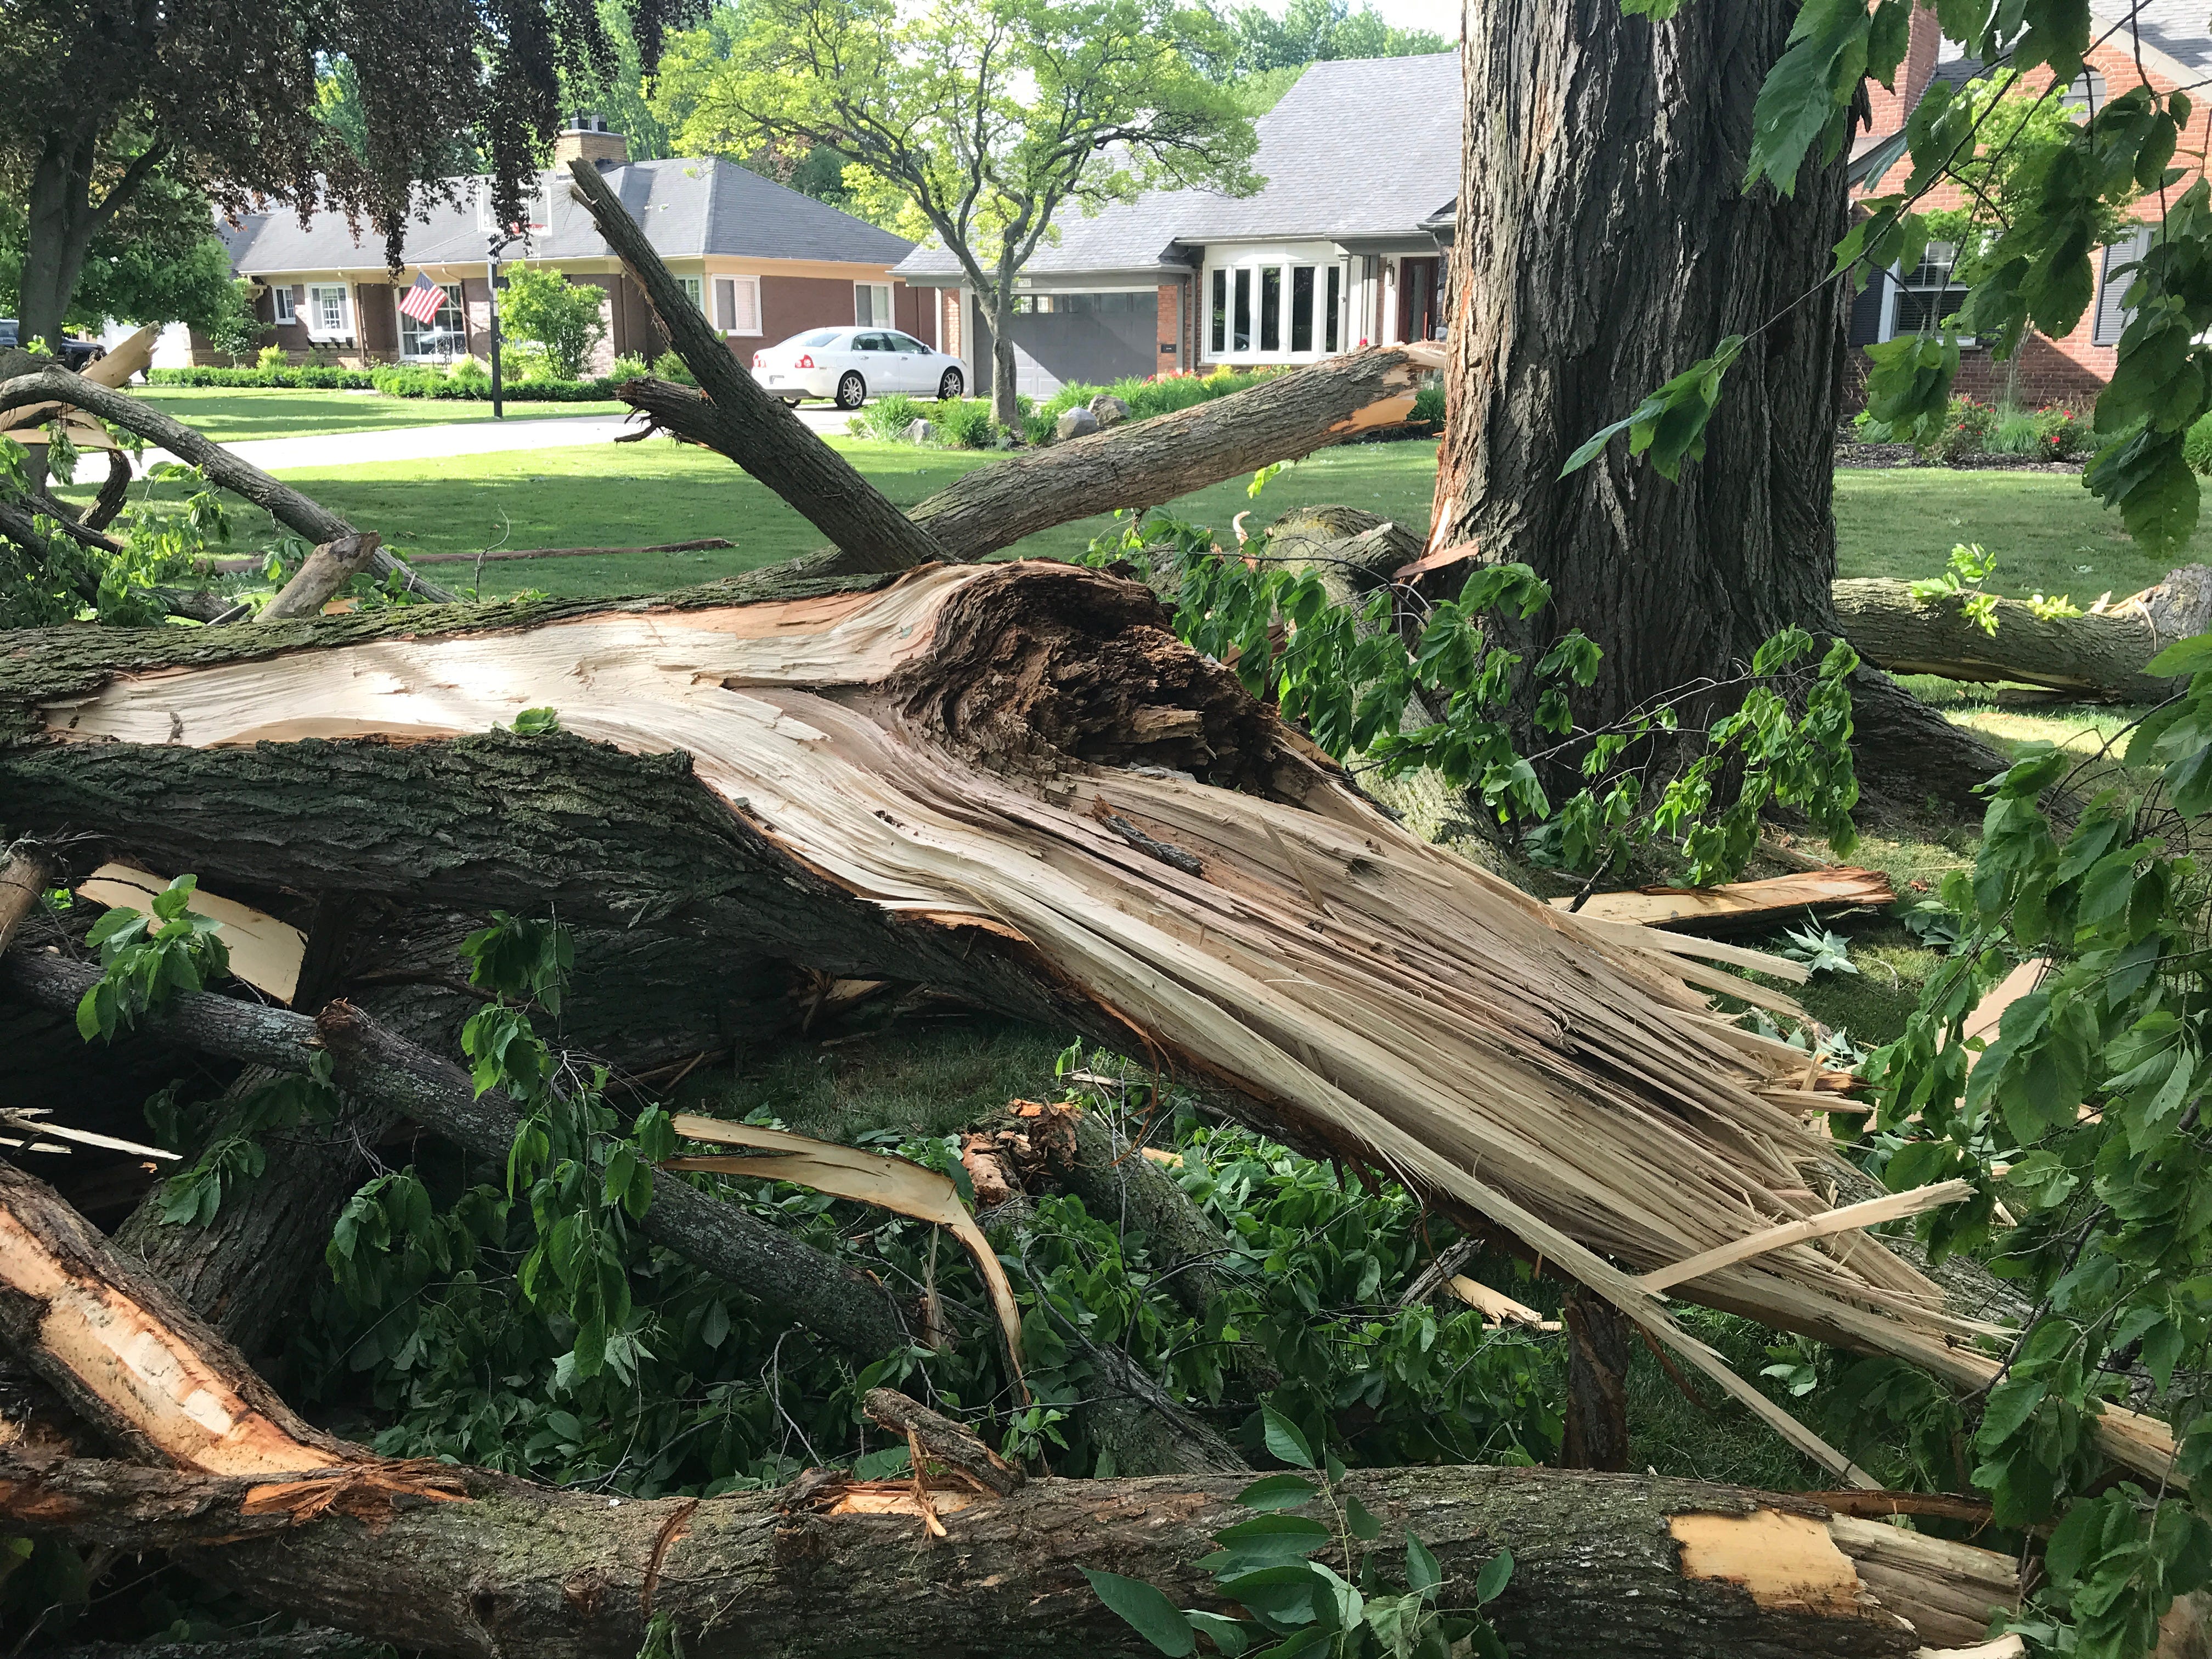 High winds brought down trees along Sunningdale in Grosse Pointe Woods.